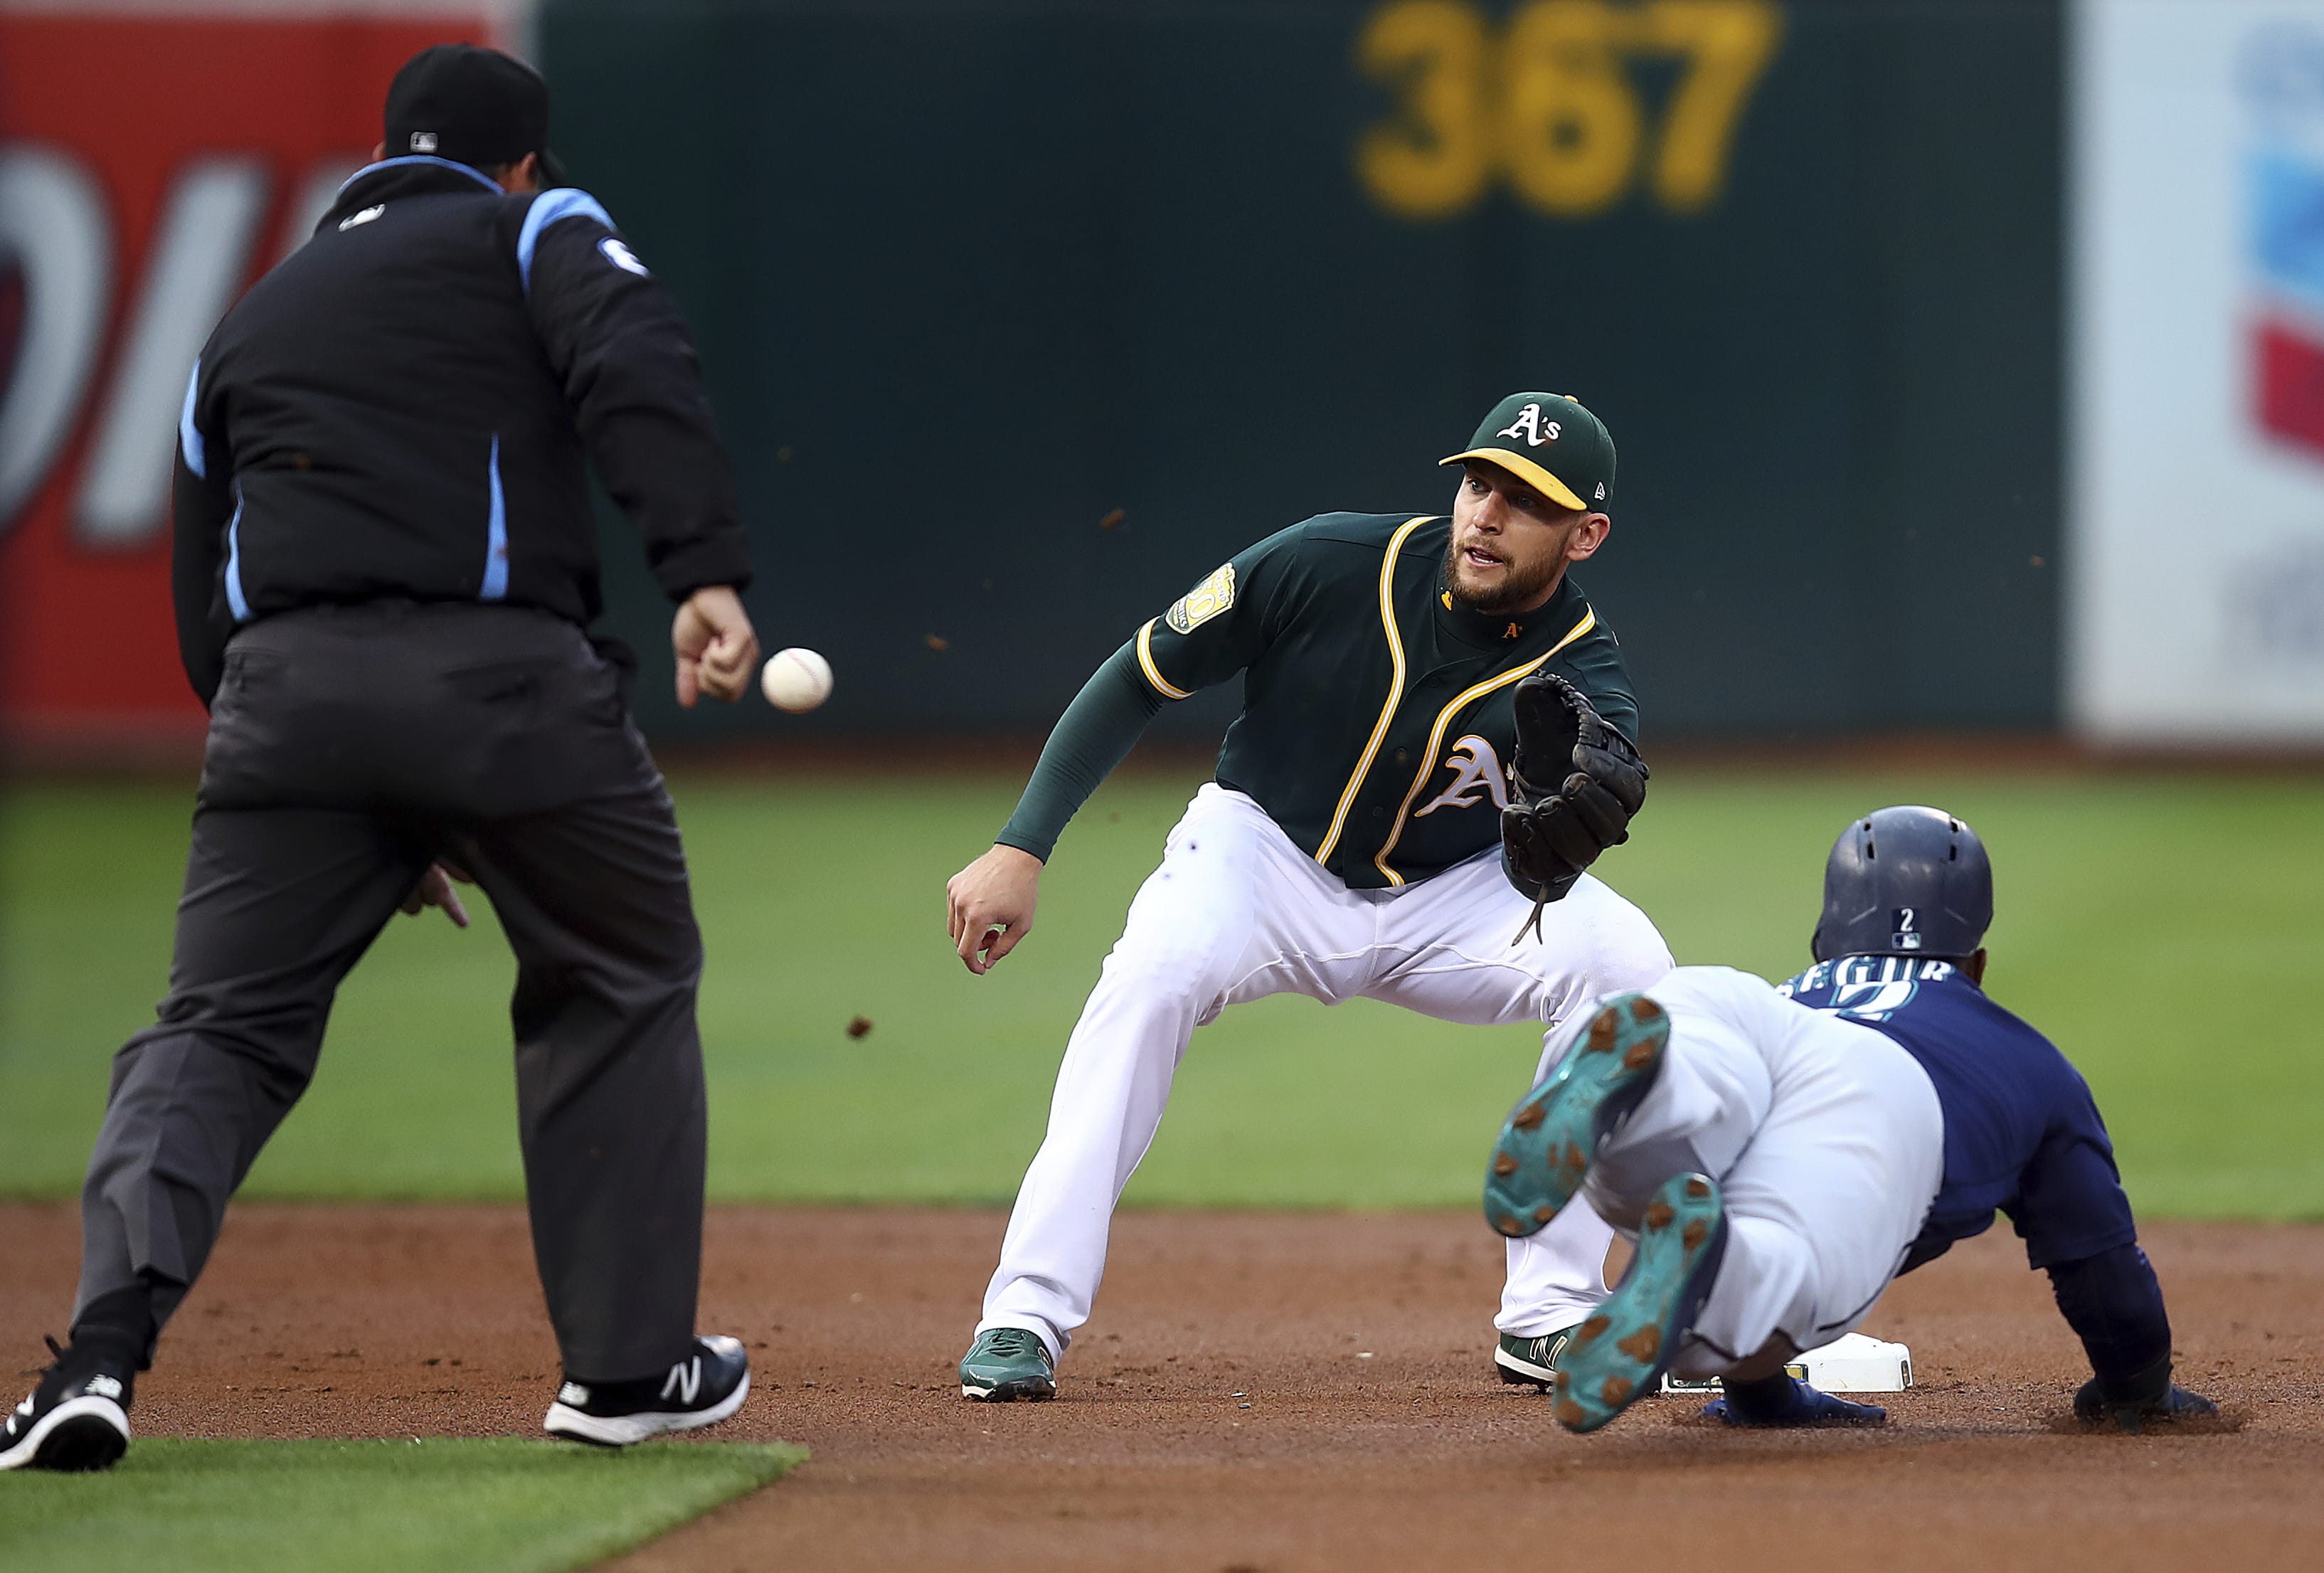 Oakland Athletics' Jed Lowrie waits for the ball to tag out Seattle Mariners' Jean Segura, right, in the first inning of a baseball game Monday, Aug. 13, 2018, in Oakland, Calif.